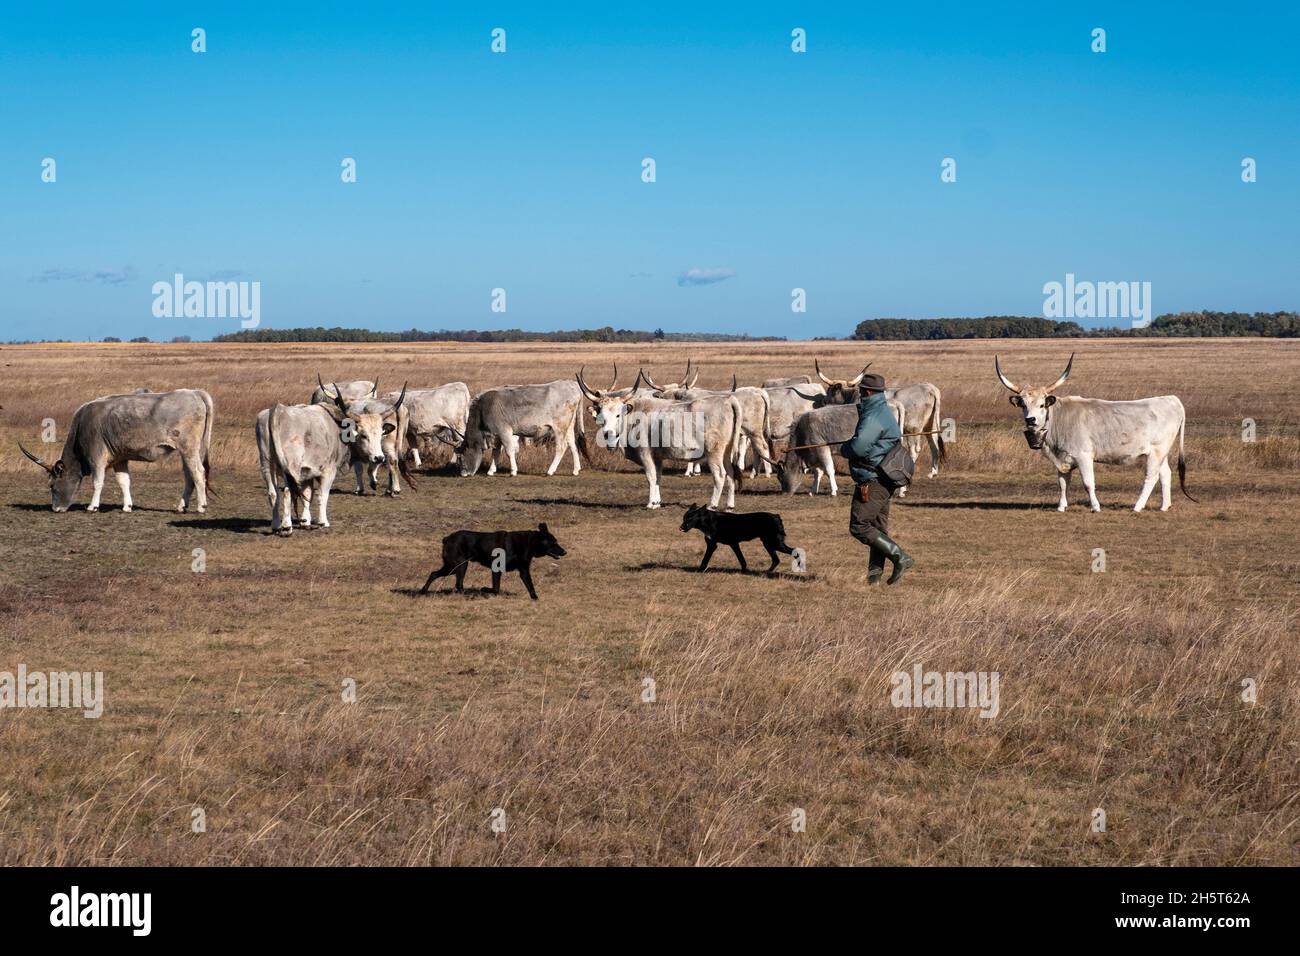 A herdsman  attends a herd of  cattle  in the puszta, Hortobagy National Park, Hungary Stock Photo